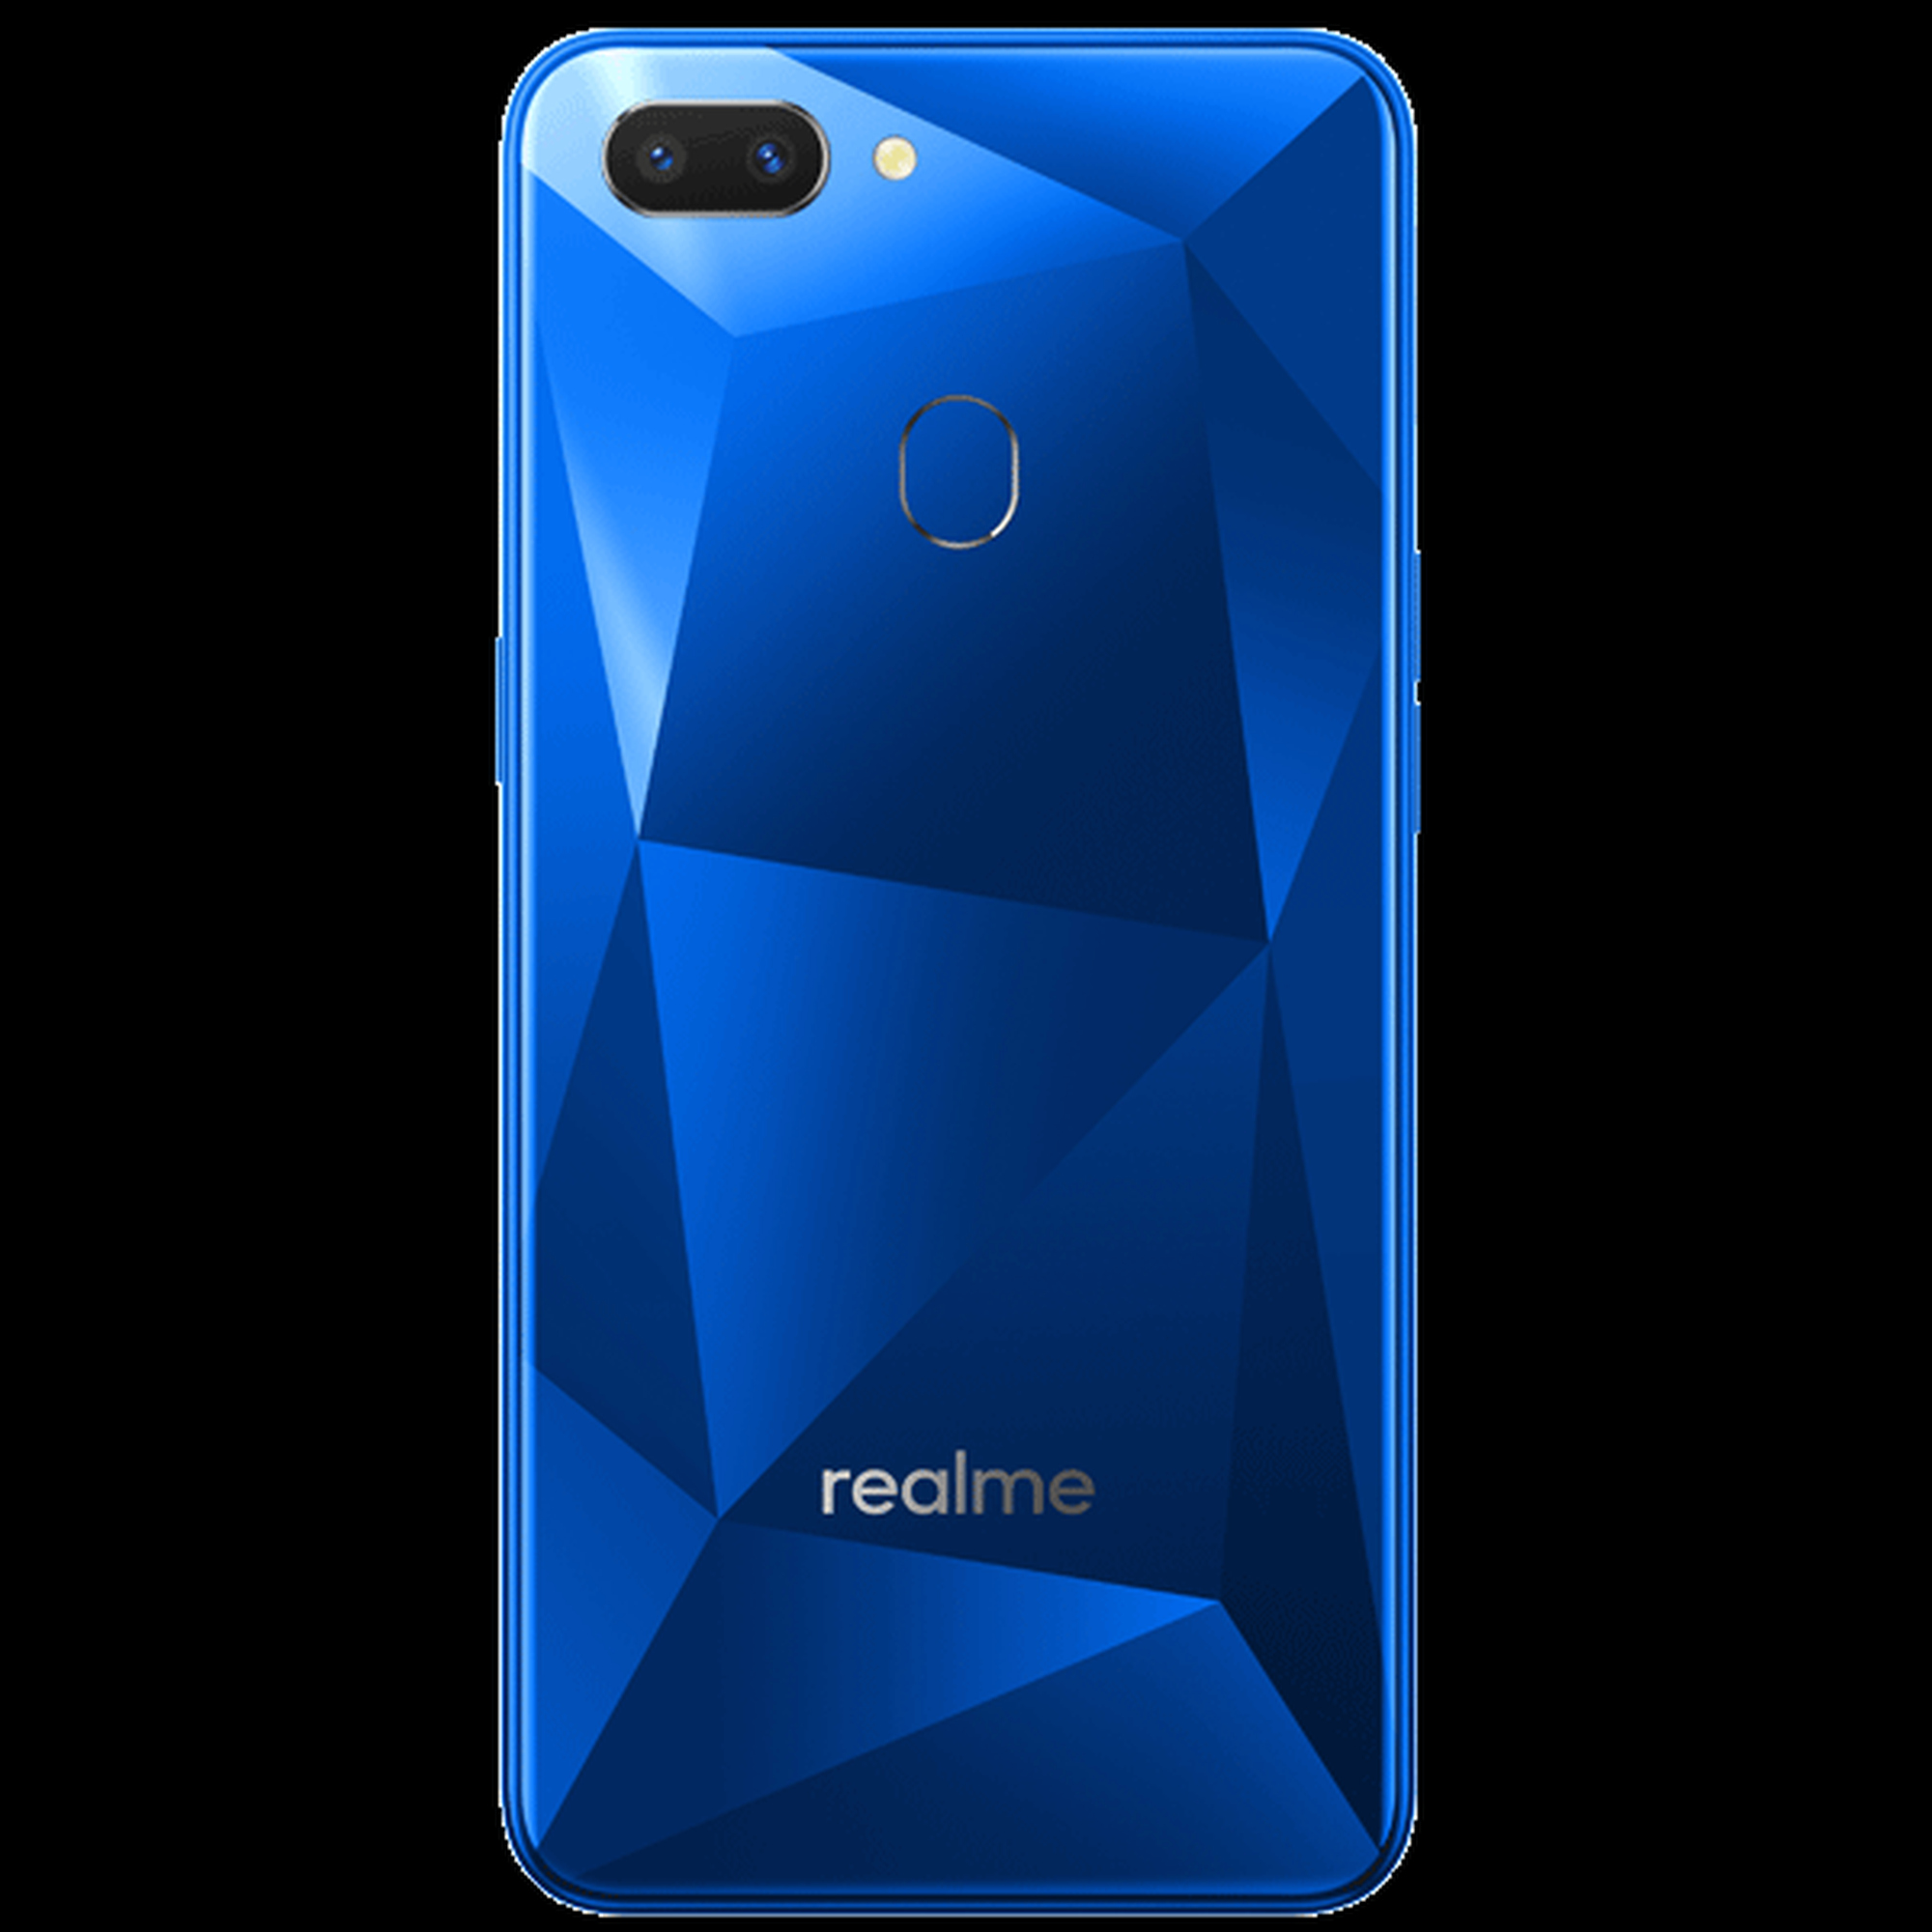 Realme deletes its tweet about Android Pie release for Realme 1 and Realme 2